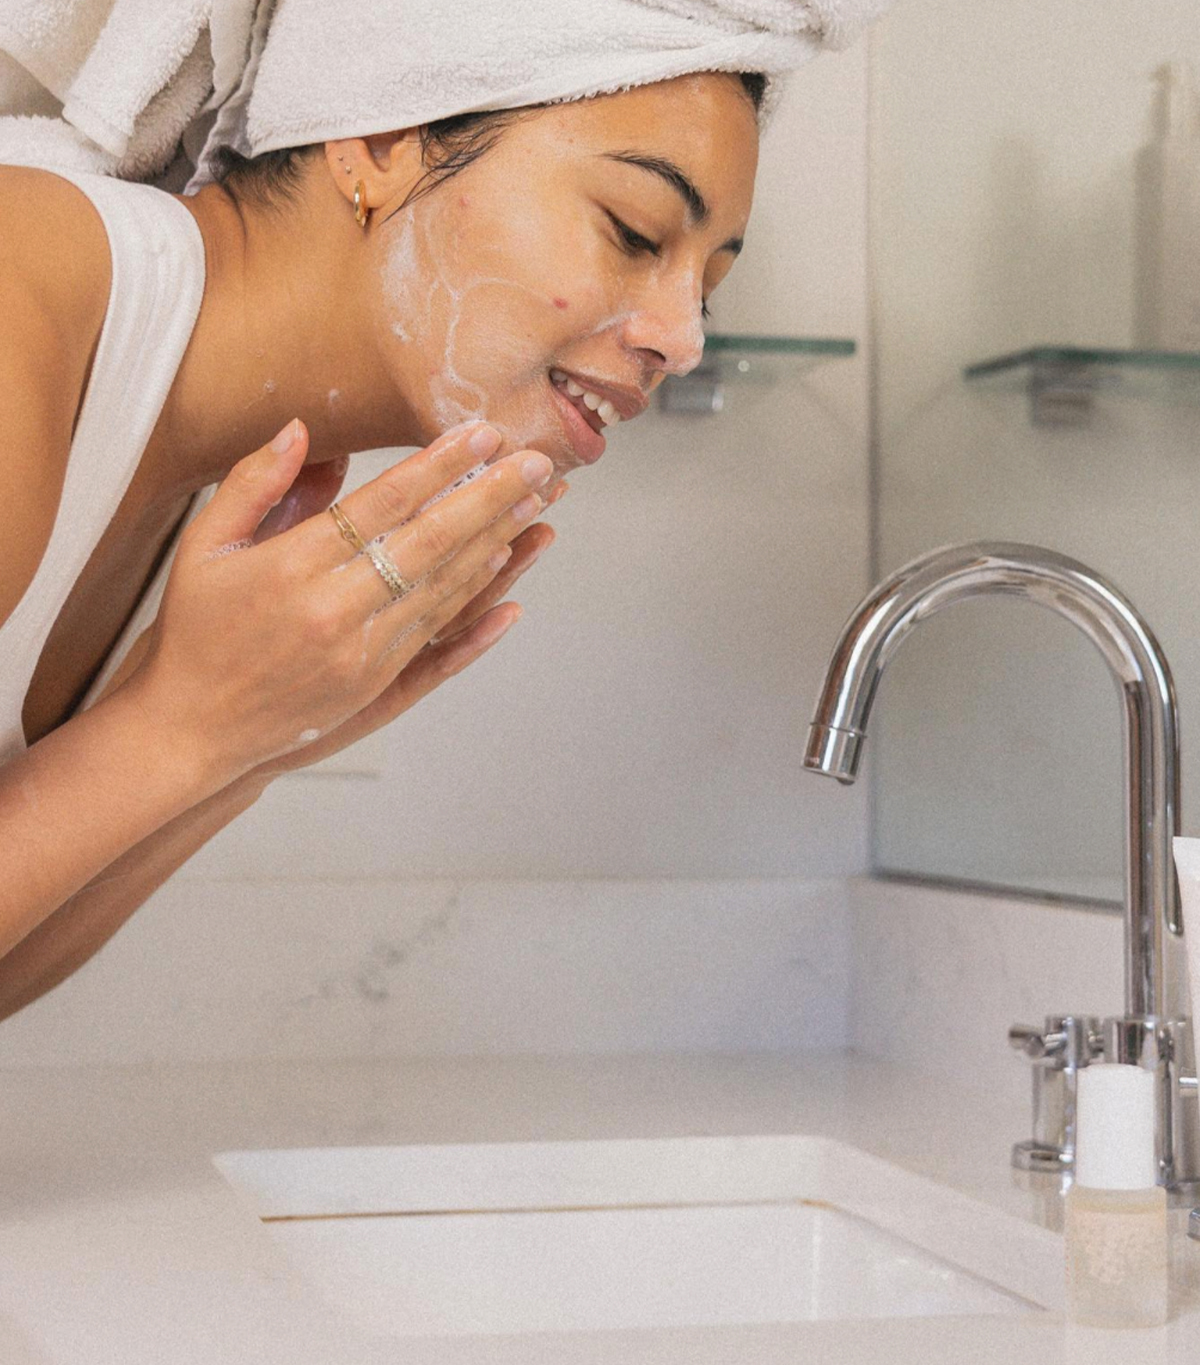 Best face washes for acne